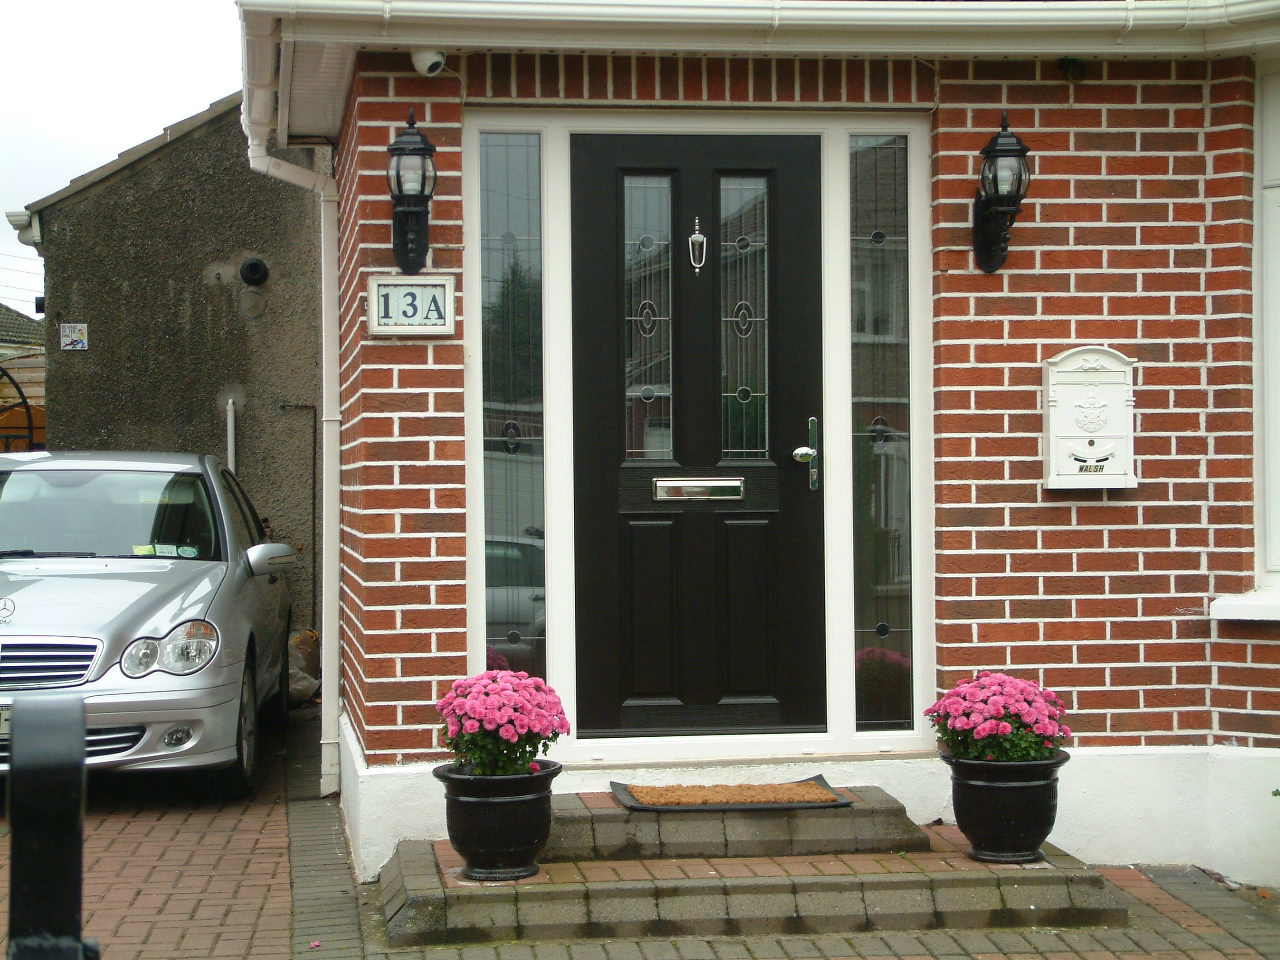 APEER APM2 BLACK DOOR WITH WHITE FRAME FITTED BY ASGARD WINDOWS IN DUBLIN 11.